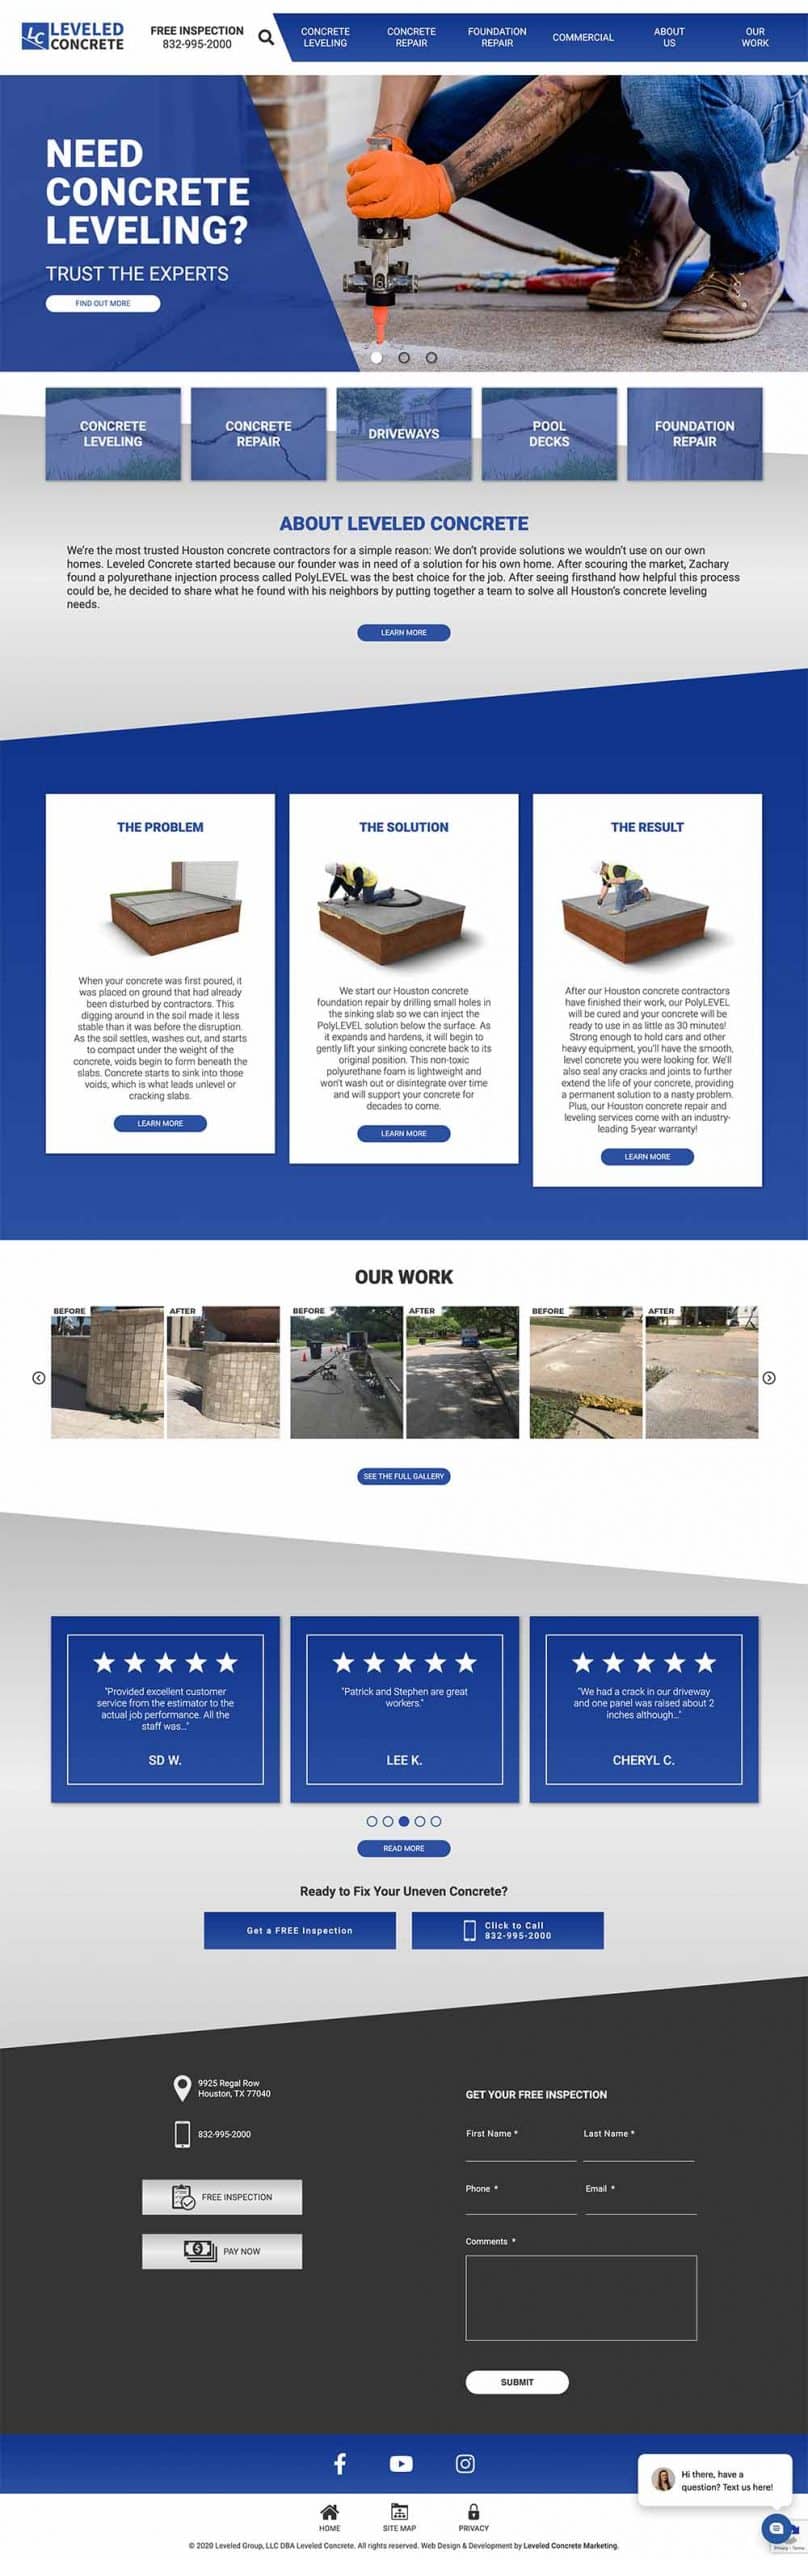 Leveled Concrete Mobile-First Website